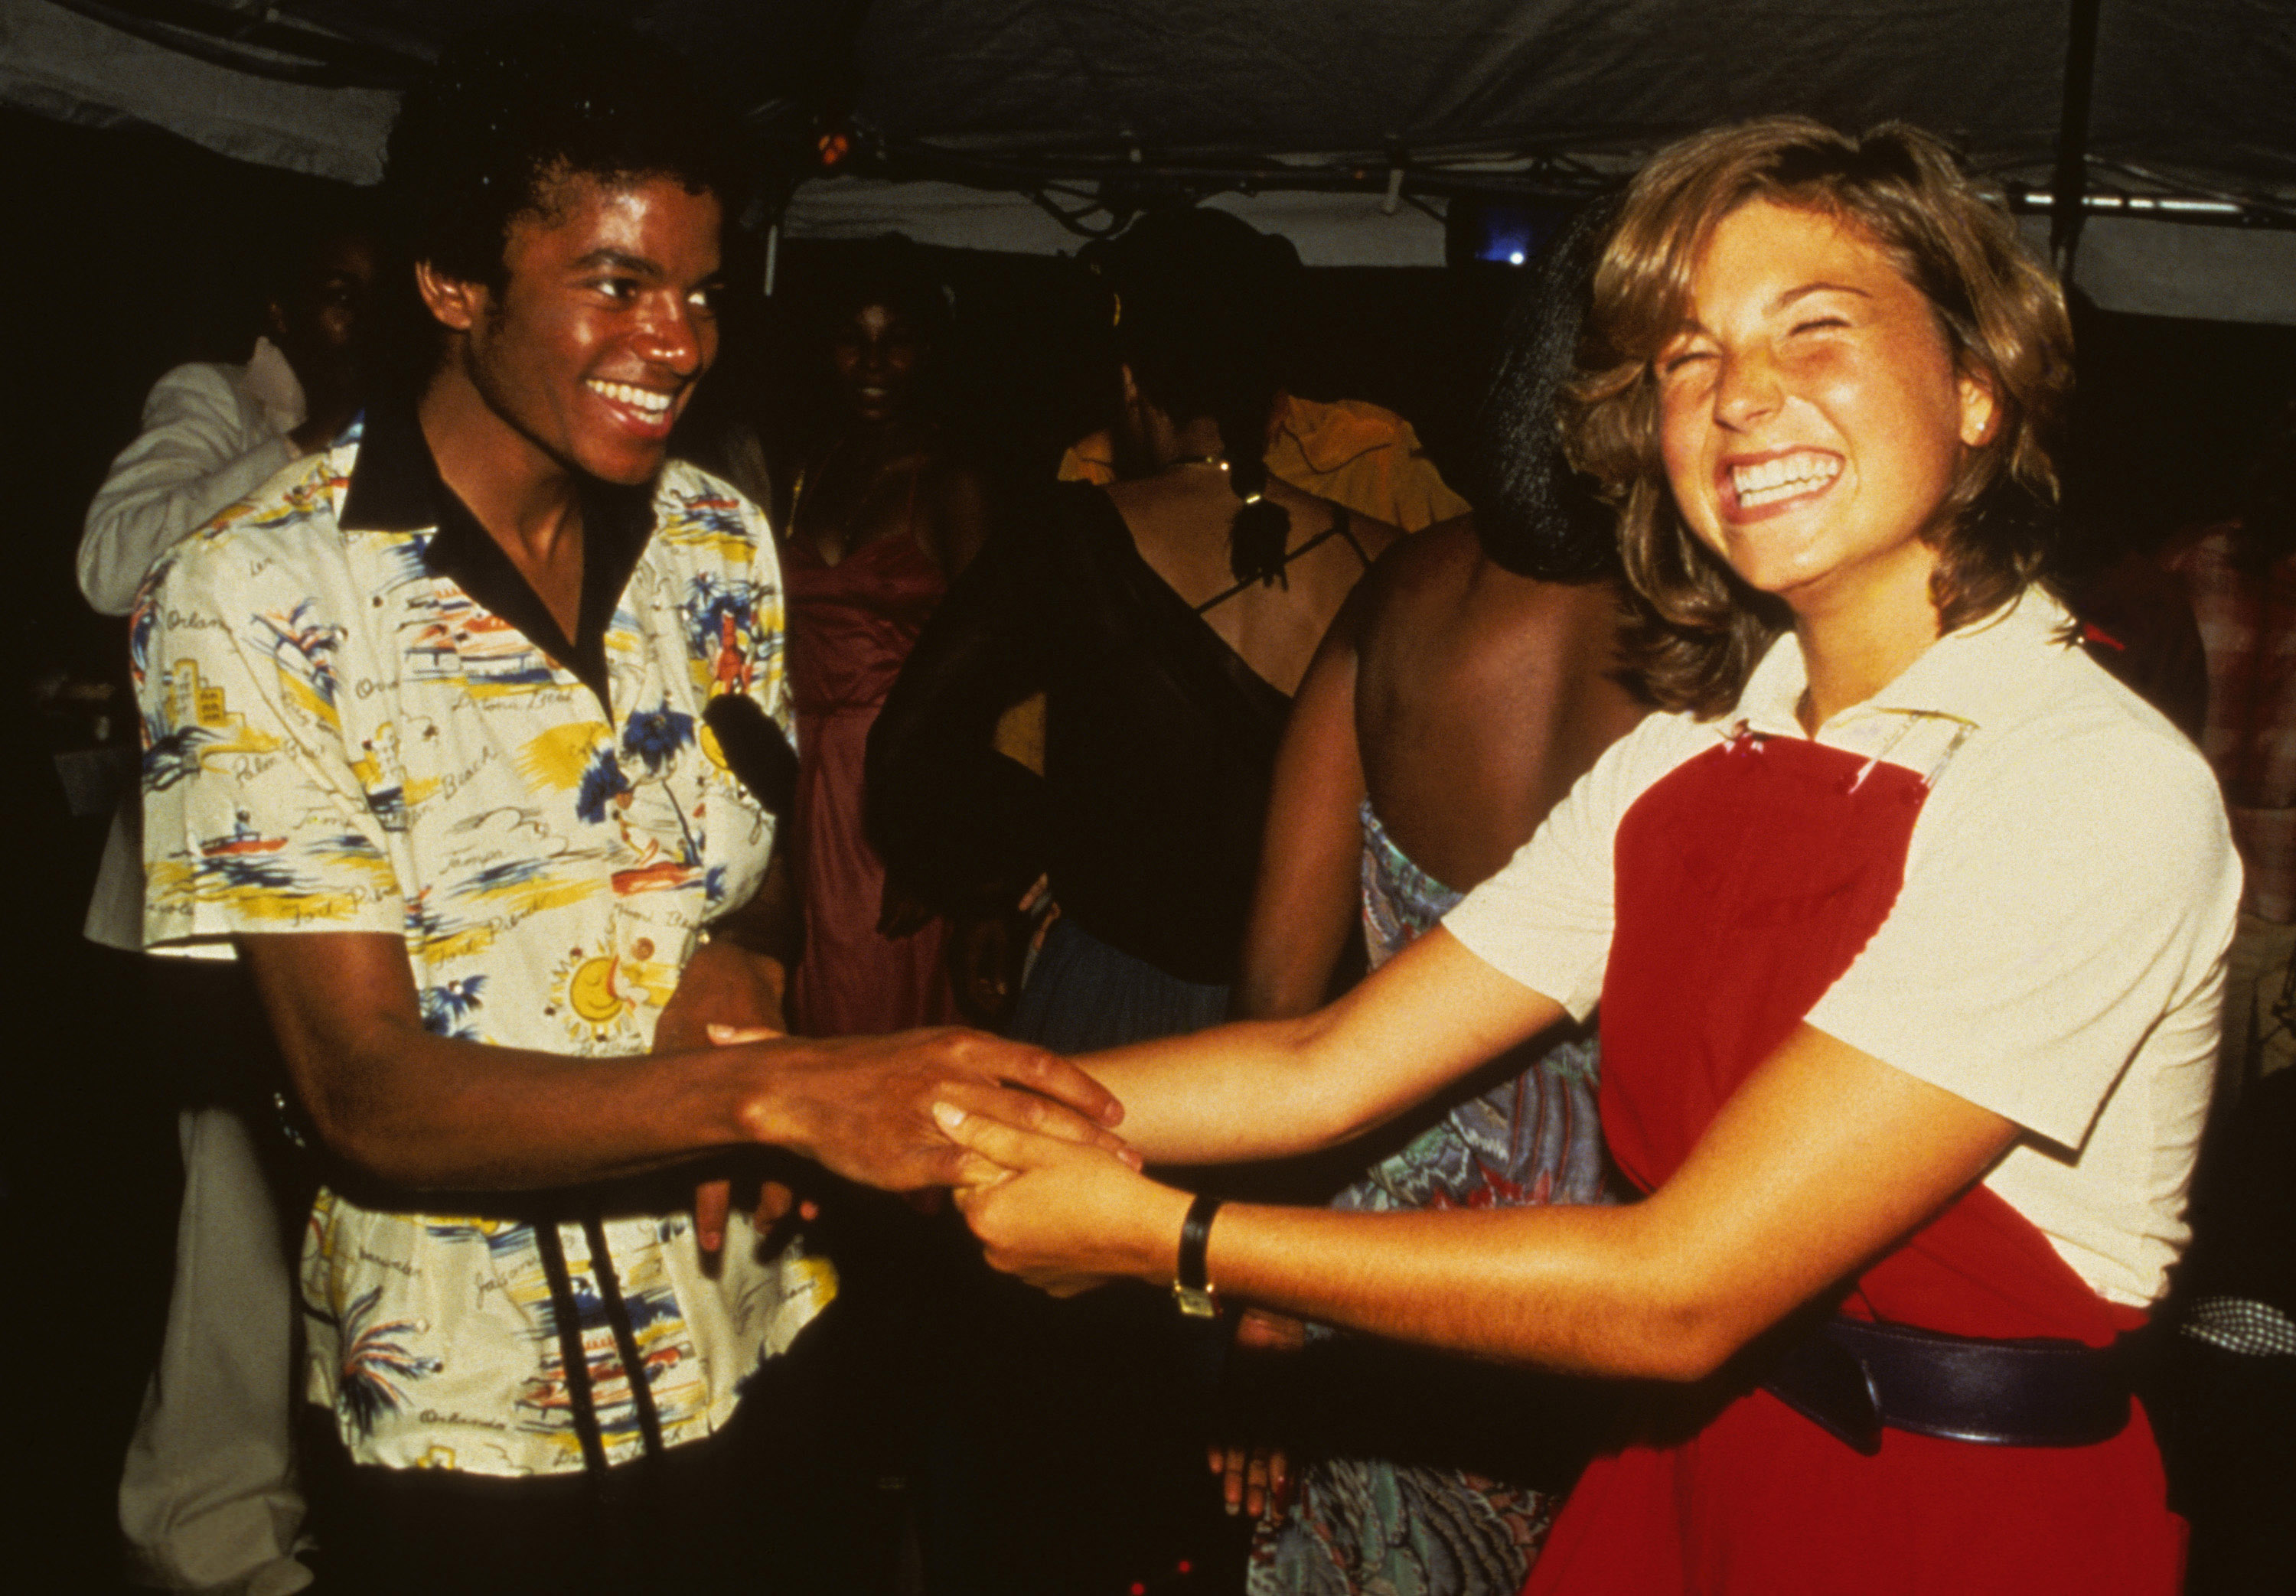 Michael Jackson and Tatum O' Neal dance at a party in Los Angeles, California, 1978. | Source: Getty Images